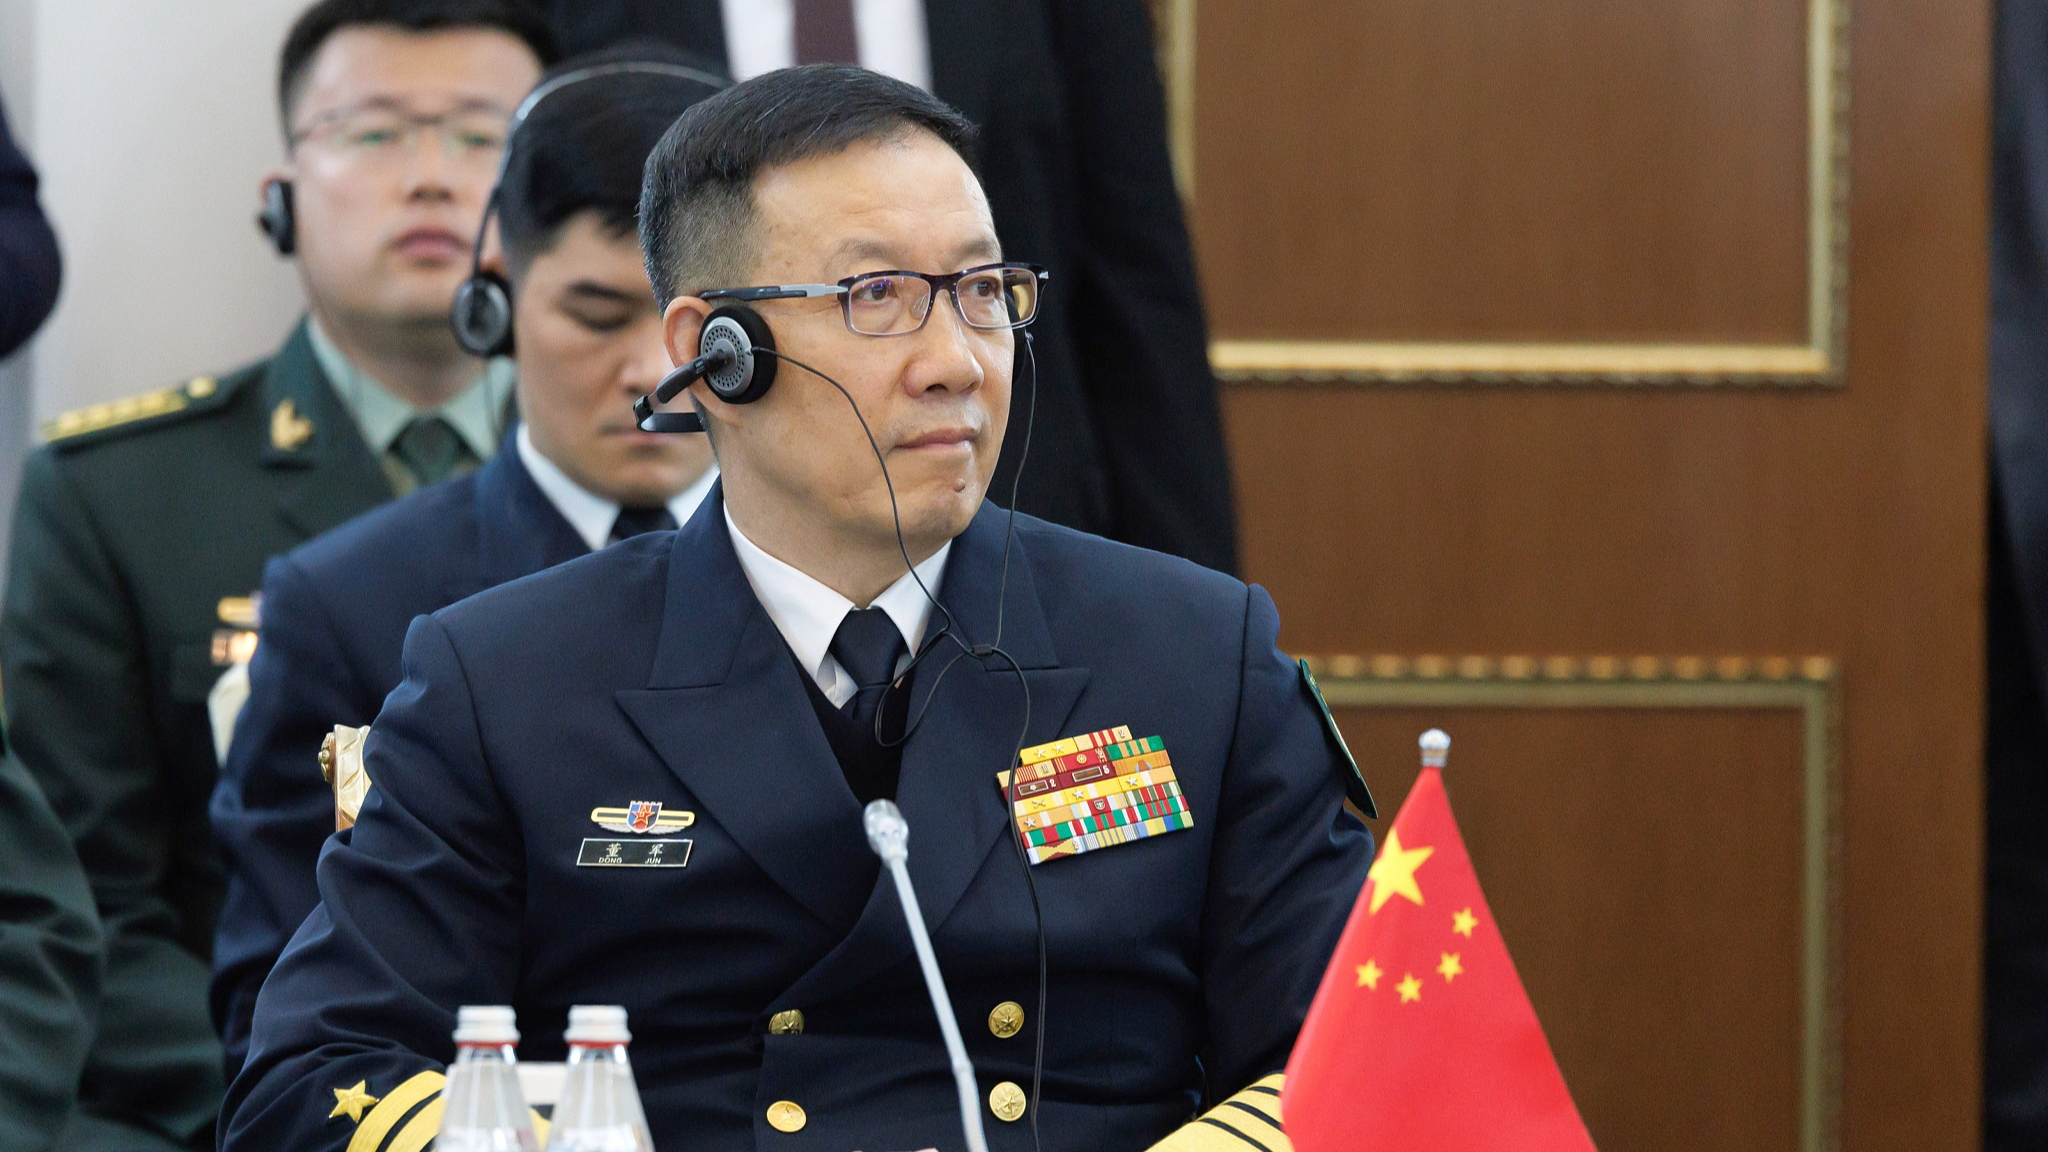 Defense minister: China-proposed initiatives benefit people worldwide